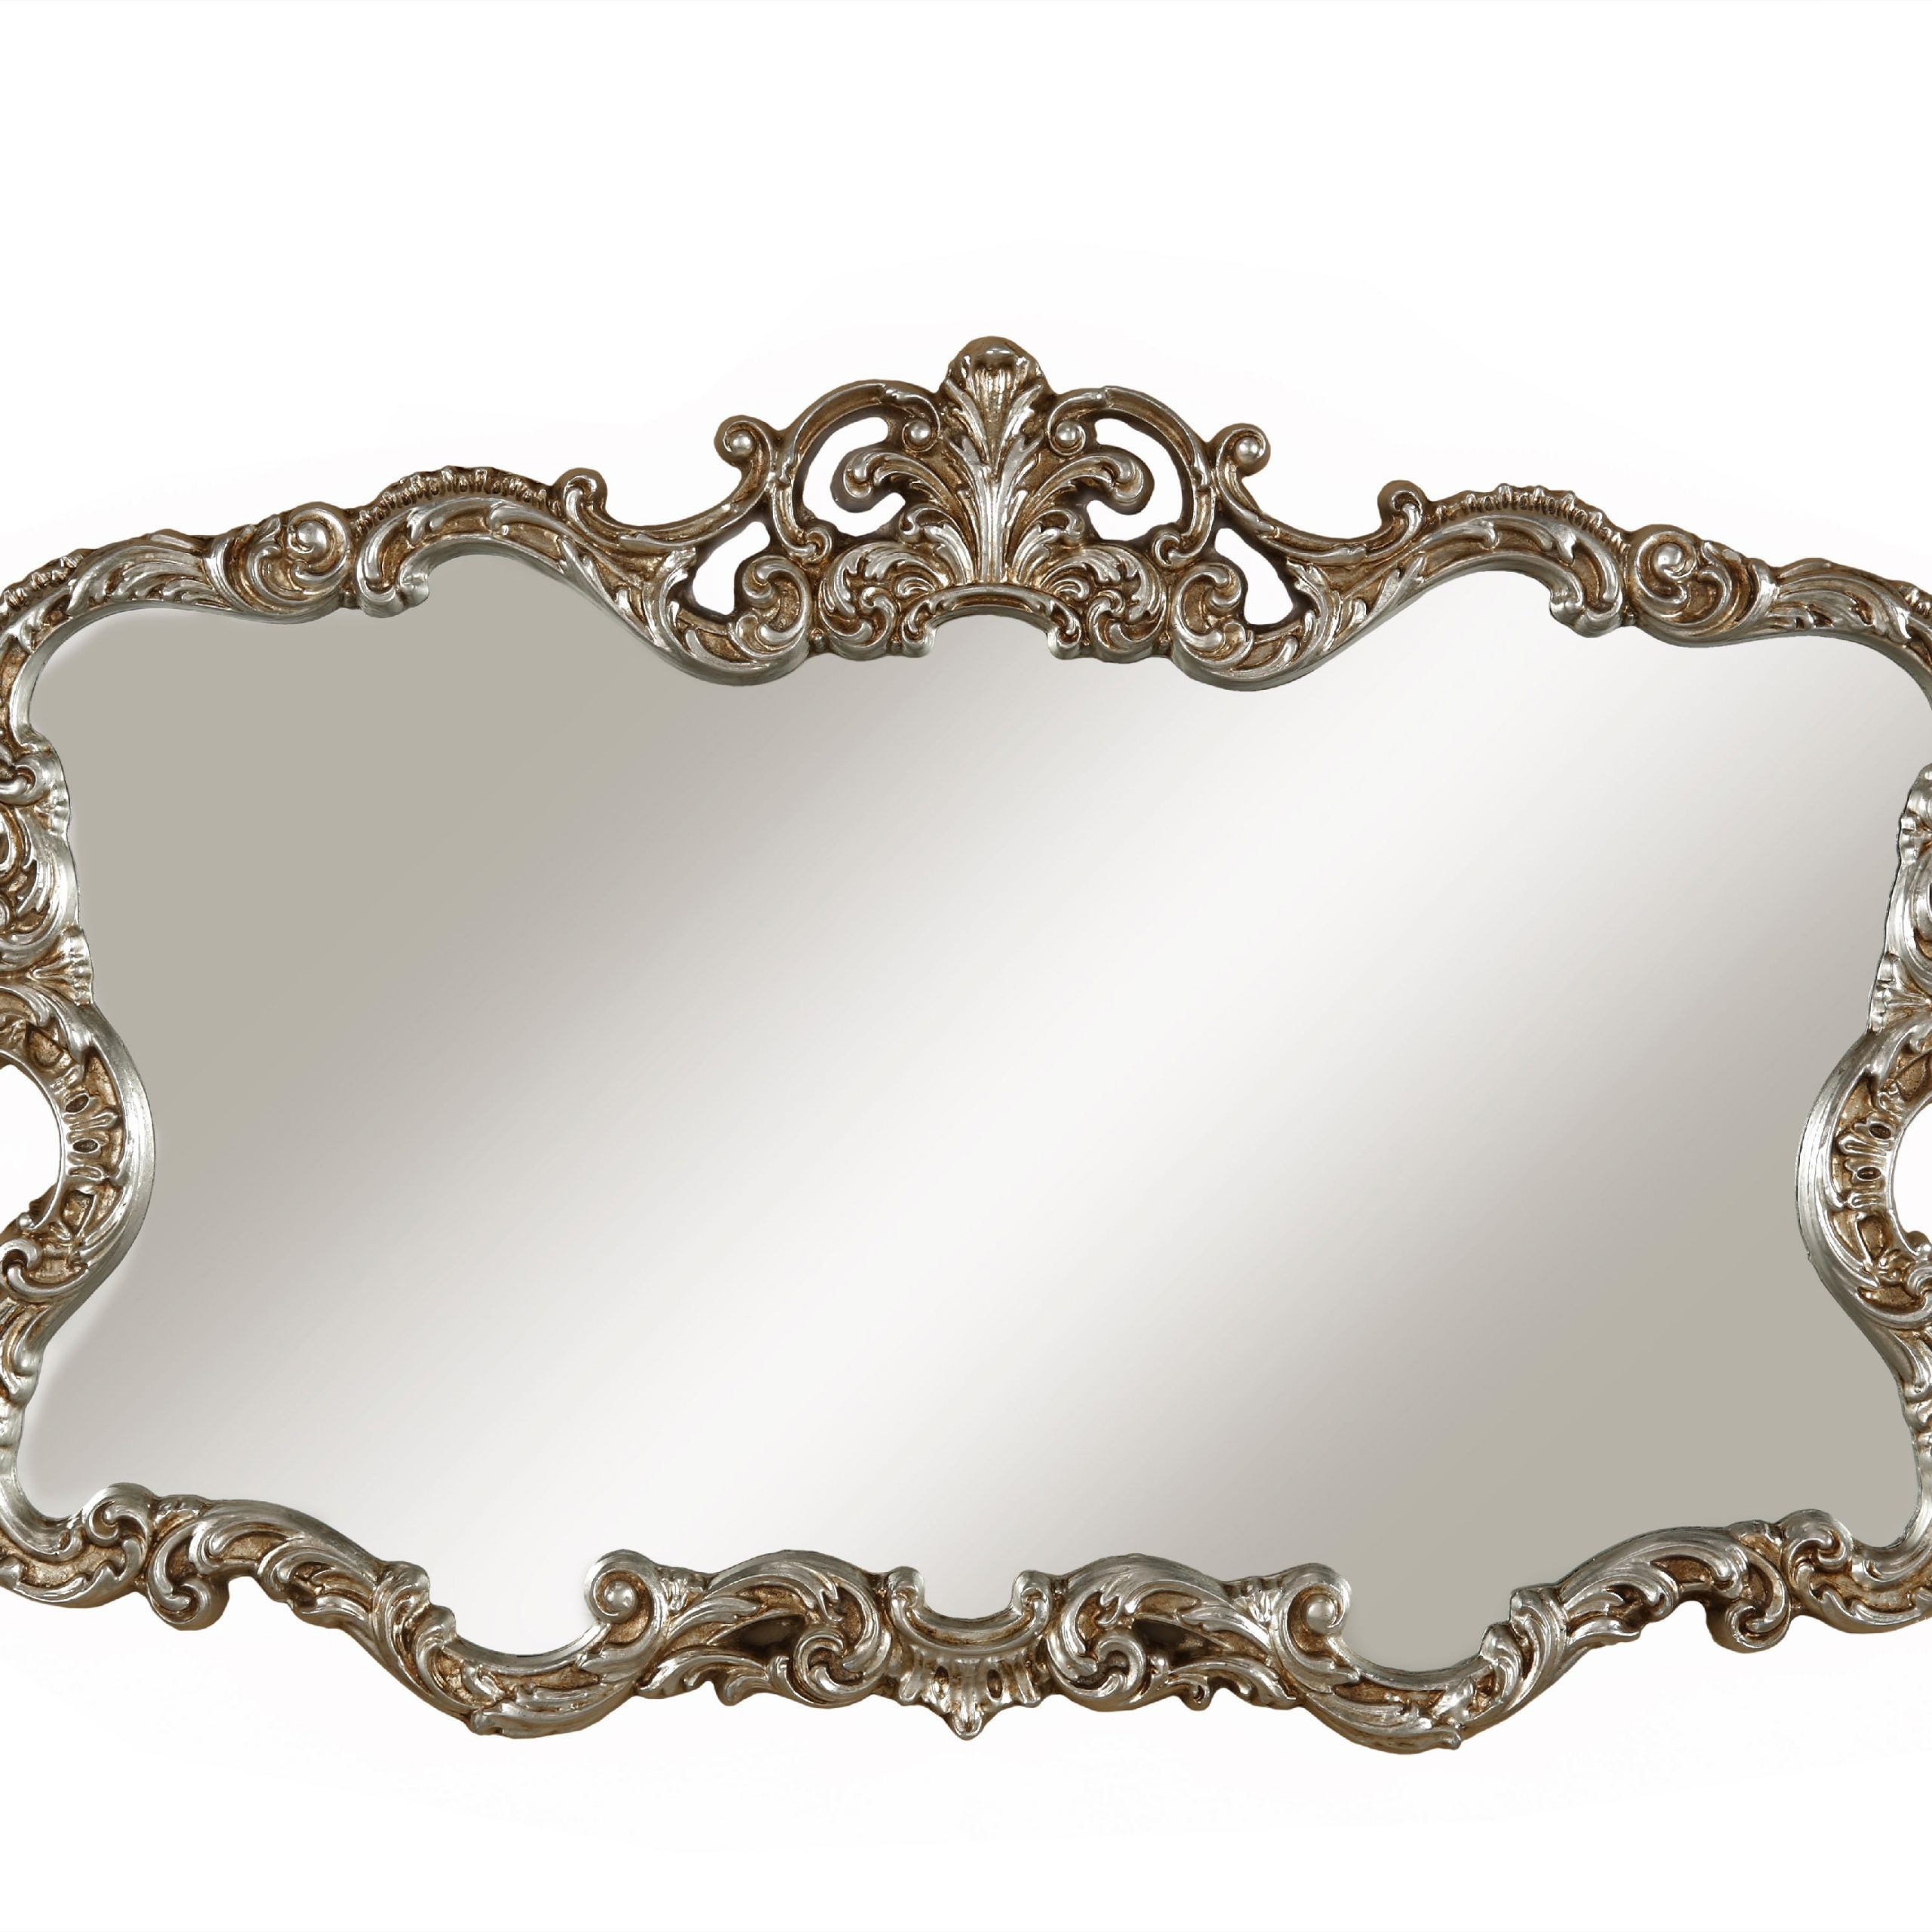 Big Aureate Antique Silver Decorative Wall Mirrormartin Svensson Pertaining To Antiqued Silver Quatrefoil Wall Mirrors (View 9 of 15)